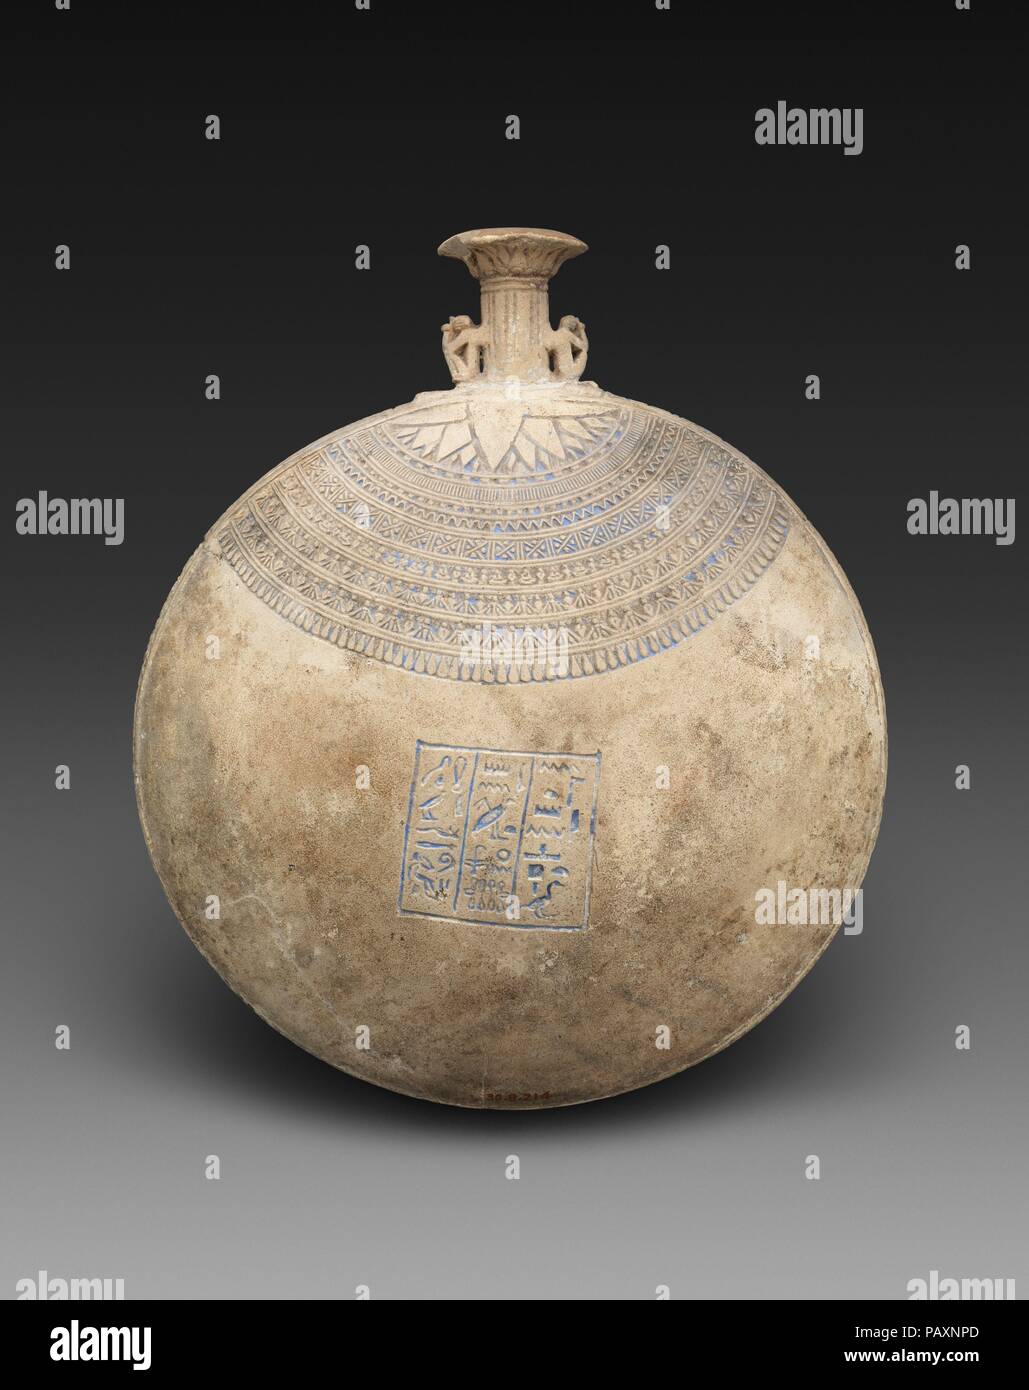 Lentoid Bottle ('New Year's Bottle') inscribed for the God's Father Amenhotep, son of the God's Father Iufaa. Dimensions: H. 21 cm (8 1/4 in); diam. 18 cm (7 1/16 in). Date: 664-525 B.C..  This lentoid flask, inscribed for a priest named Amenhotep, is an example of a New Year's bottle. Filled perhaps with perfume, oil, or water from the Nile, it would have been a gift associated with the celebration of the beginning of the year. Around the shoulders of the vase are incised bands of floral patterns, meant to echo the vegetal collar that would have been worn by a participant in a ceremonial or f Stock Photo